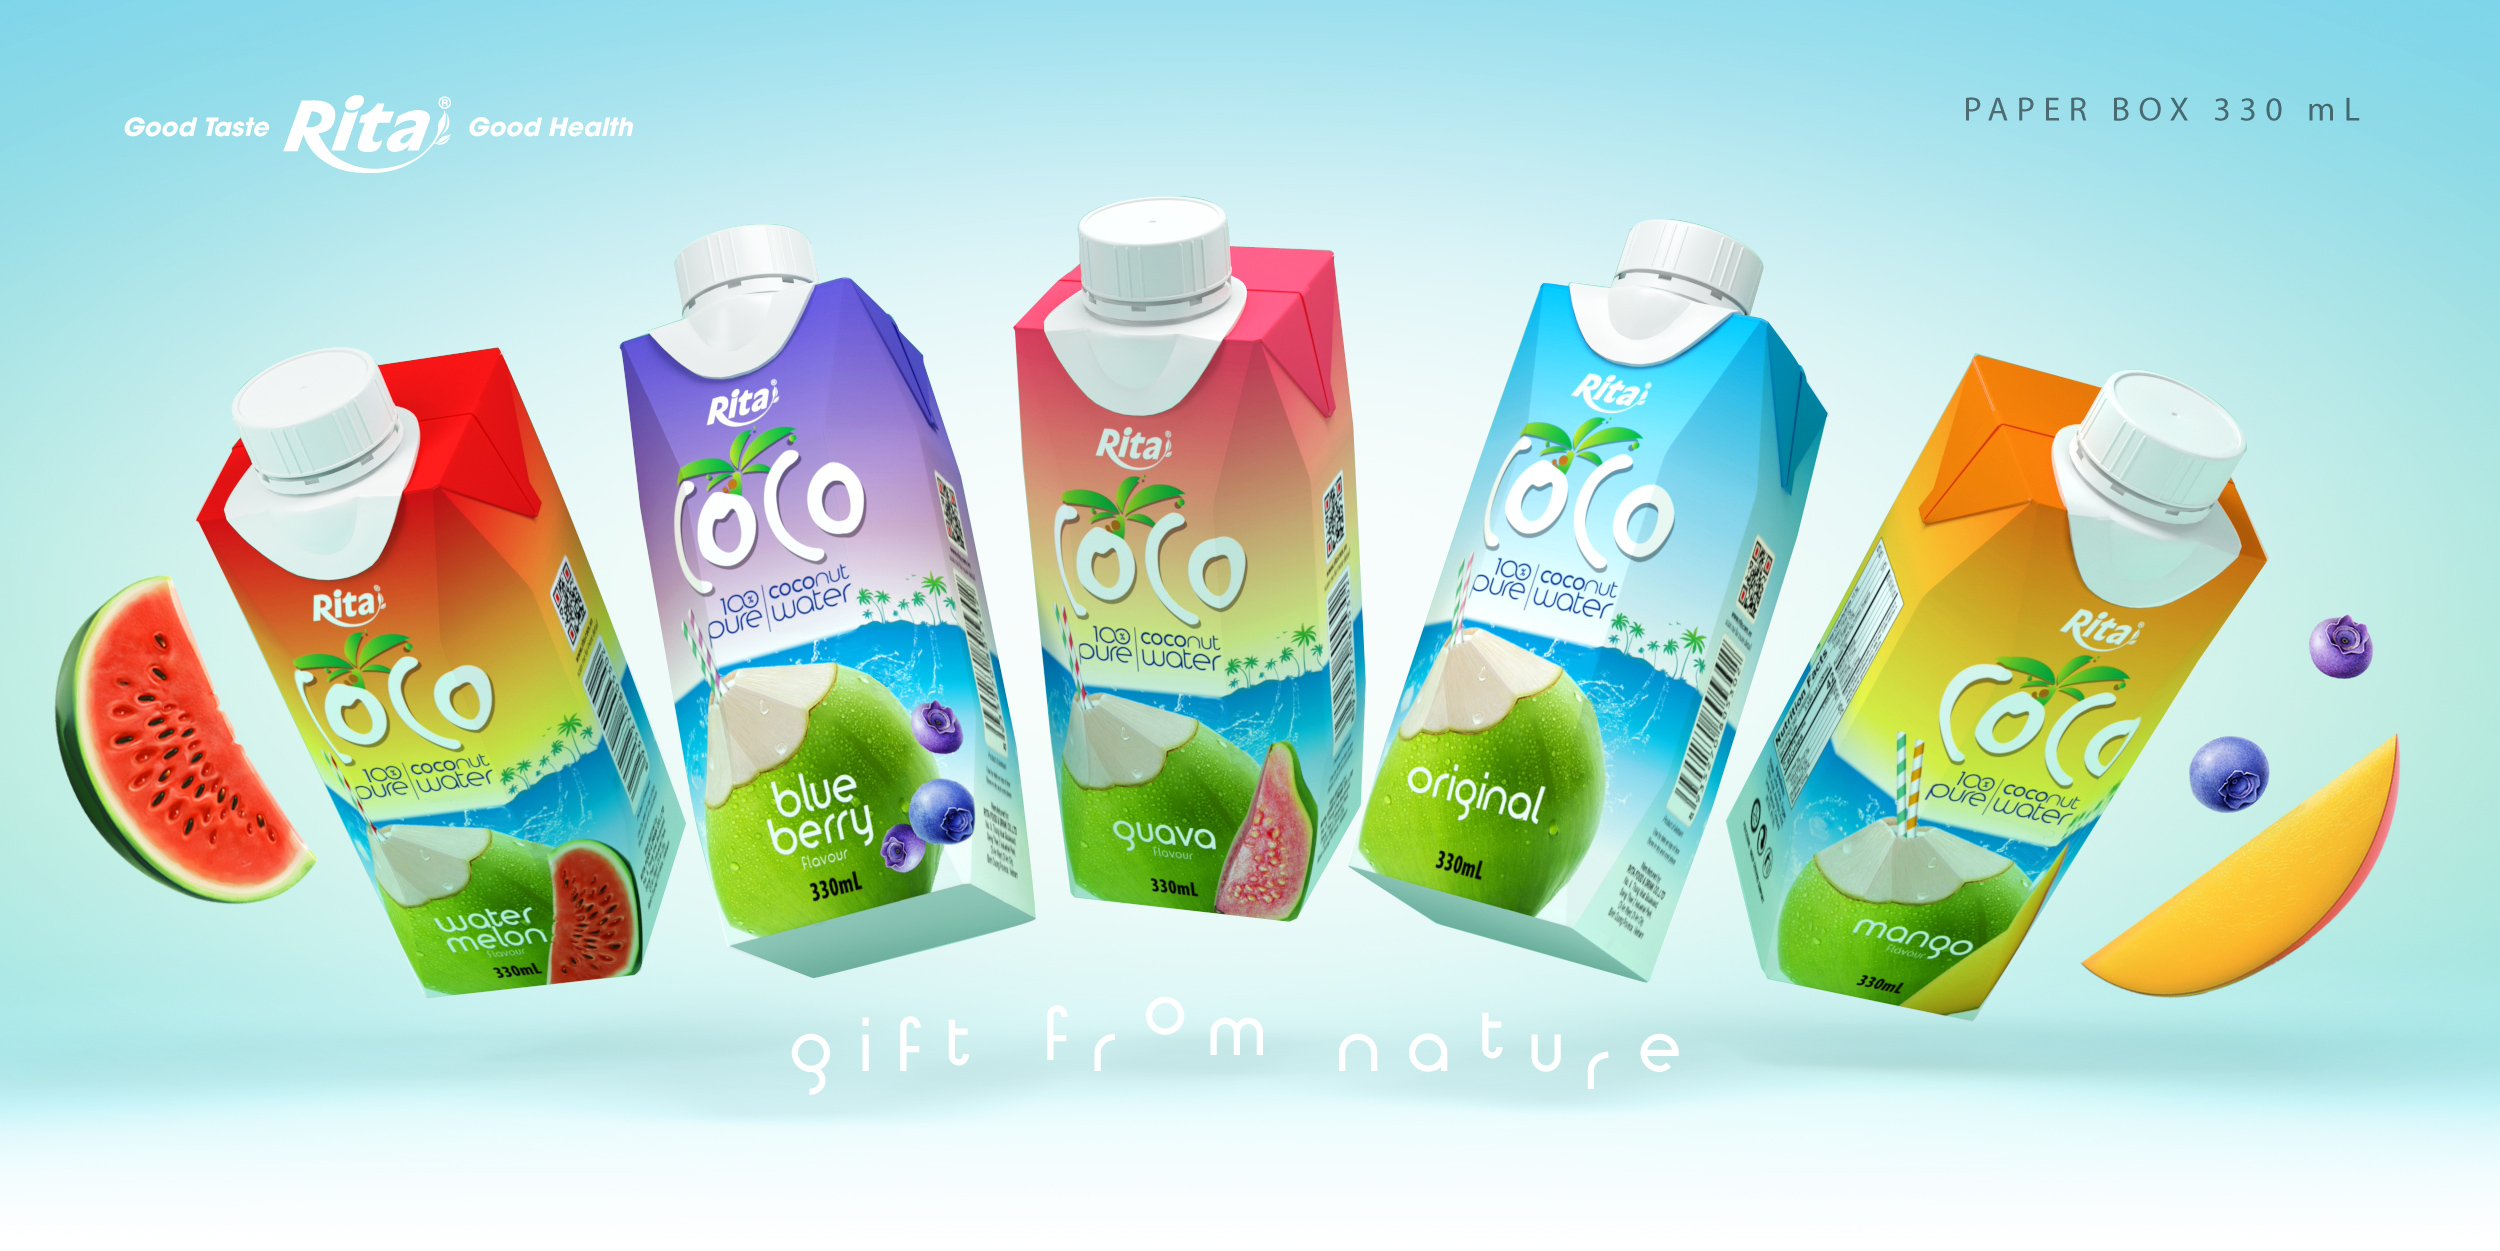 100 pure coconut water drinks with fruit juice supplier own brand